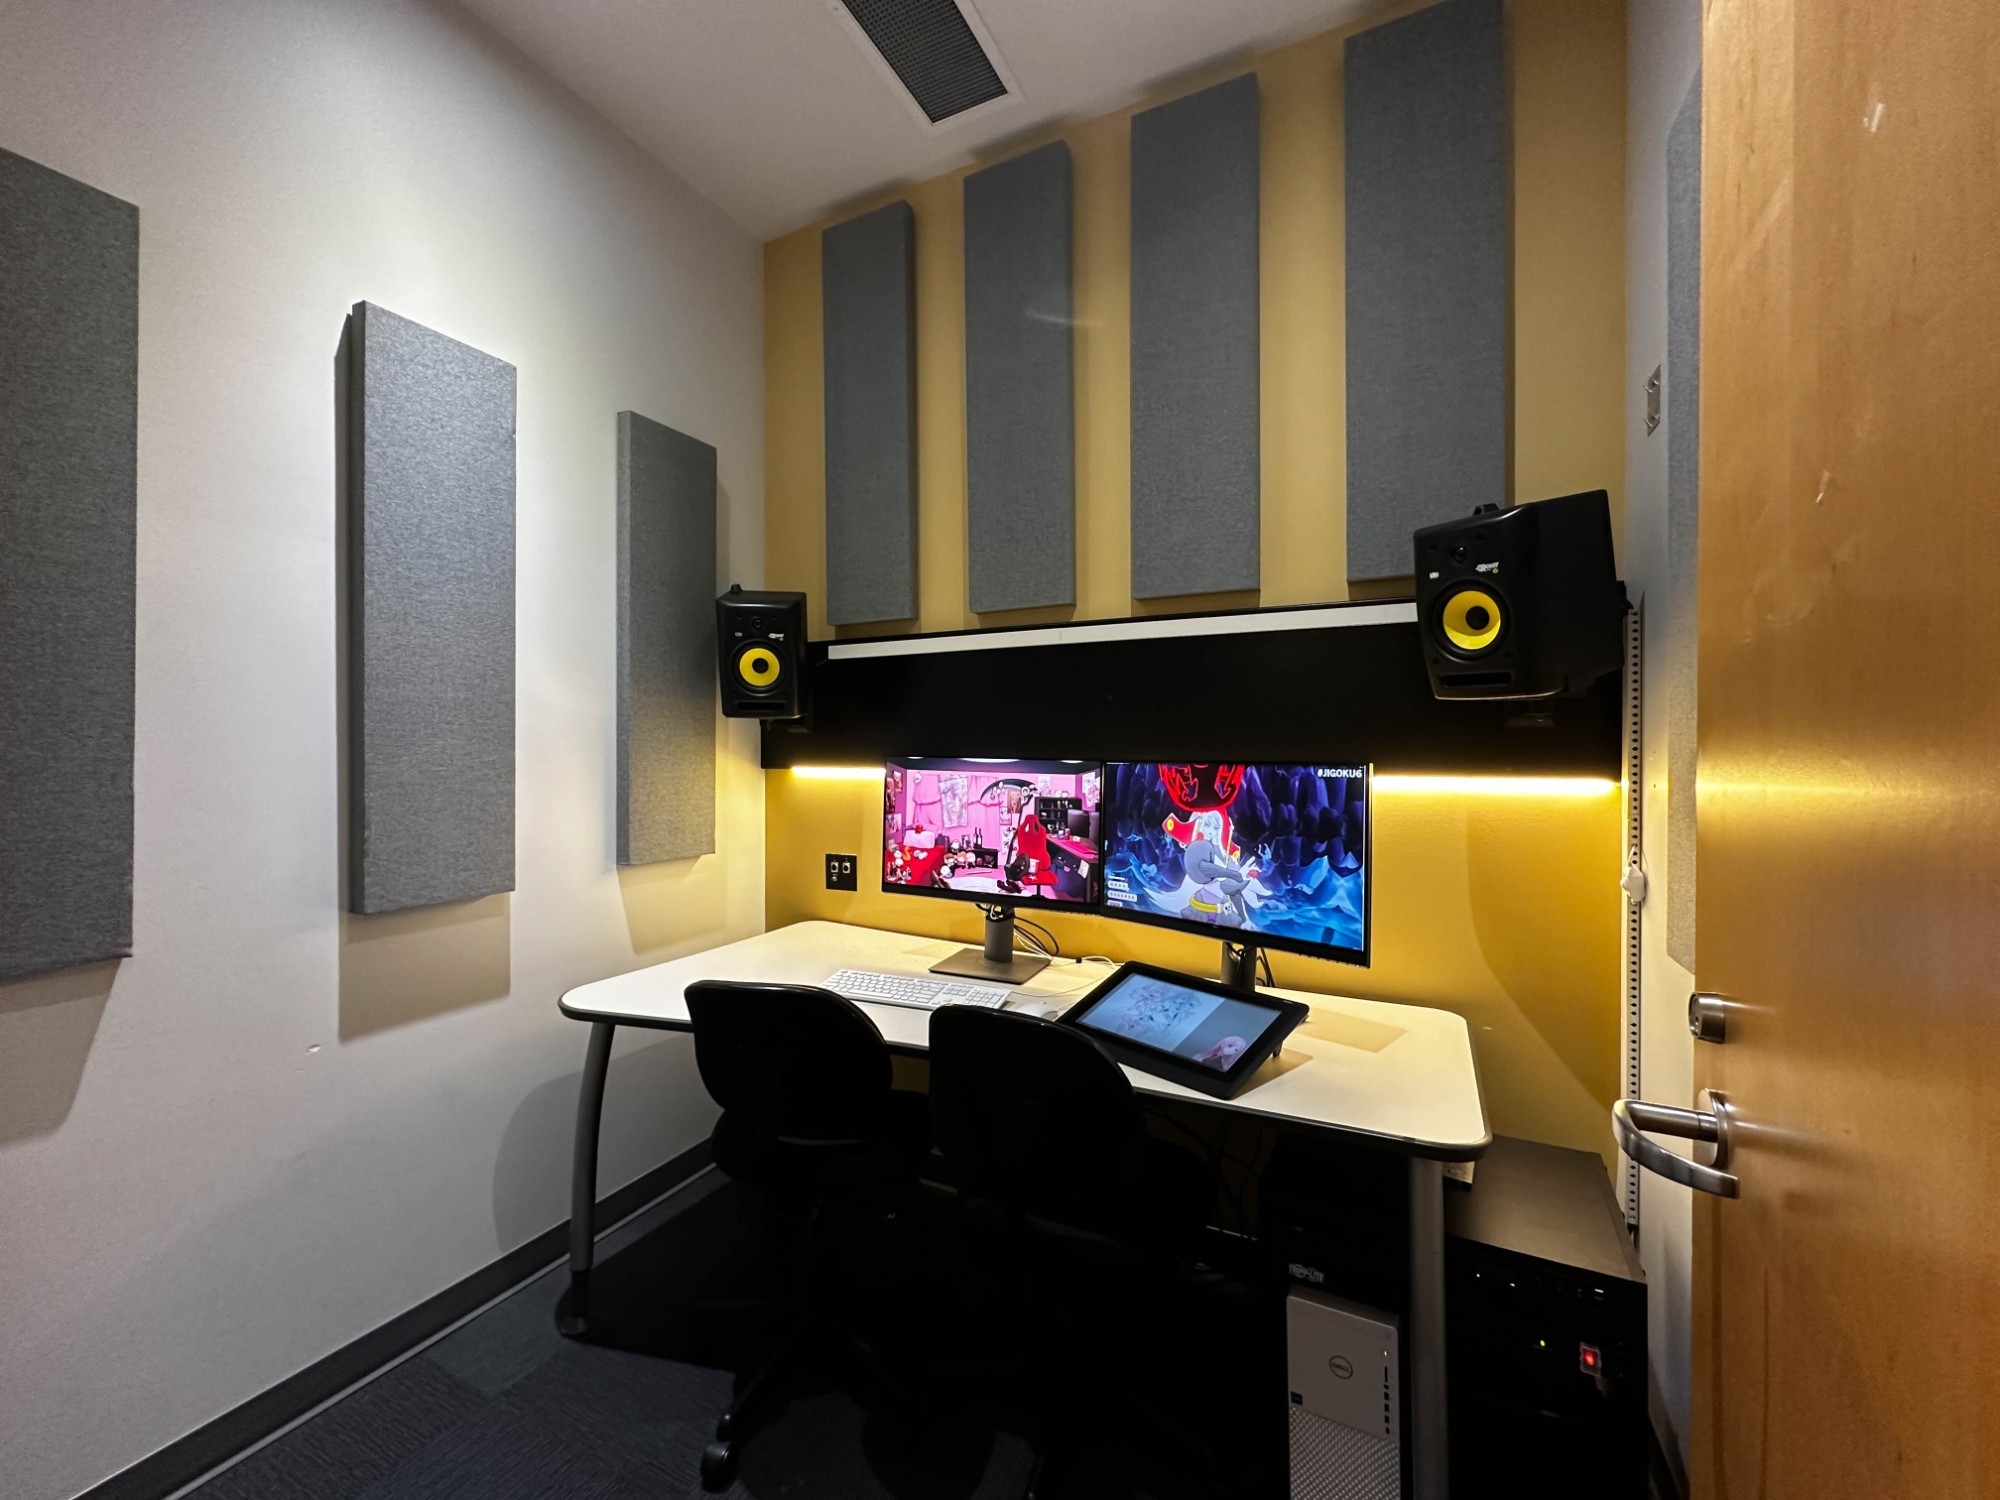 Basic Animation and Editing Suite 1 (BAE 1)